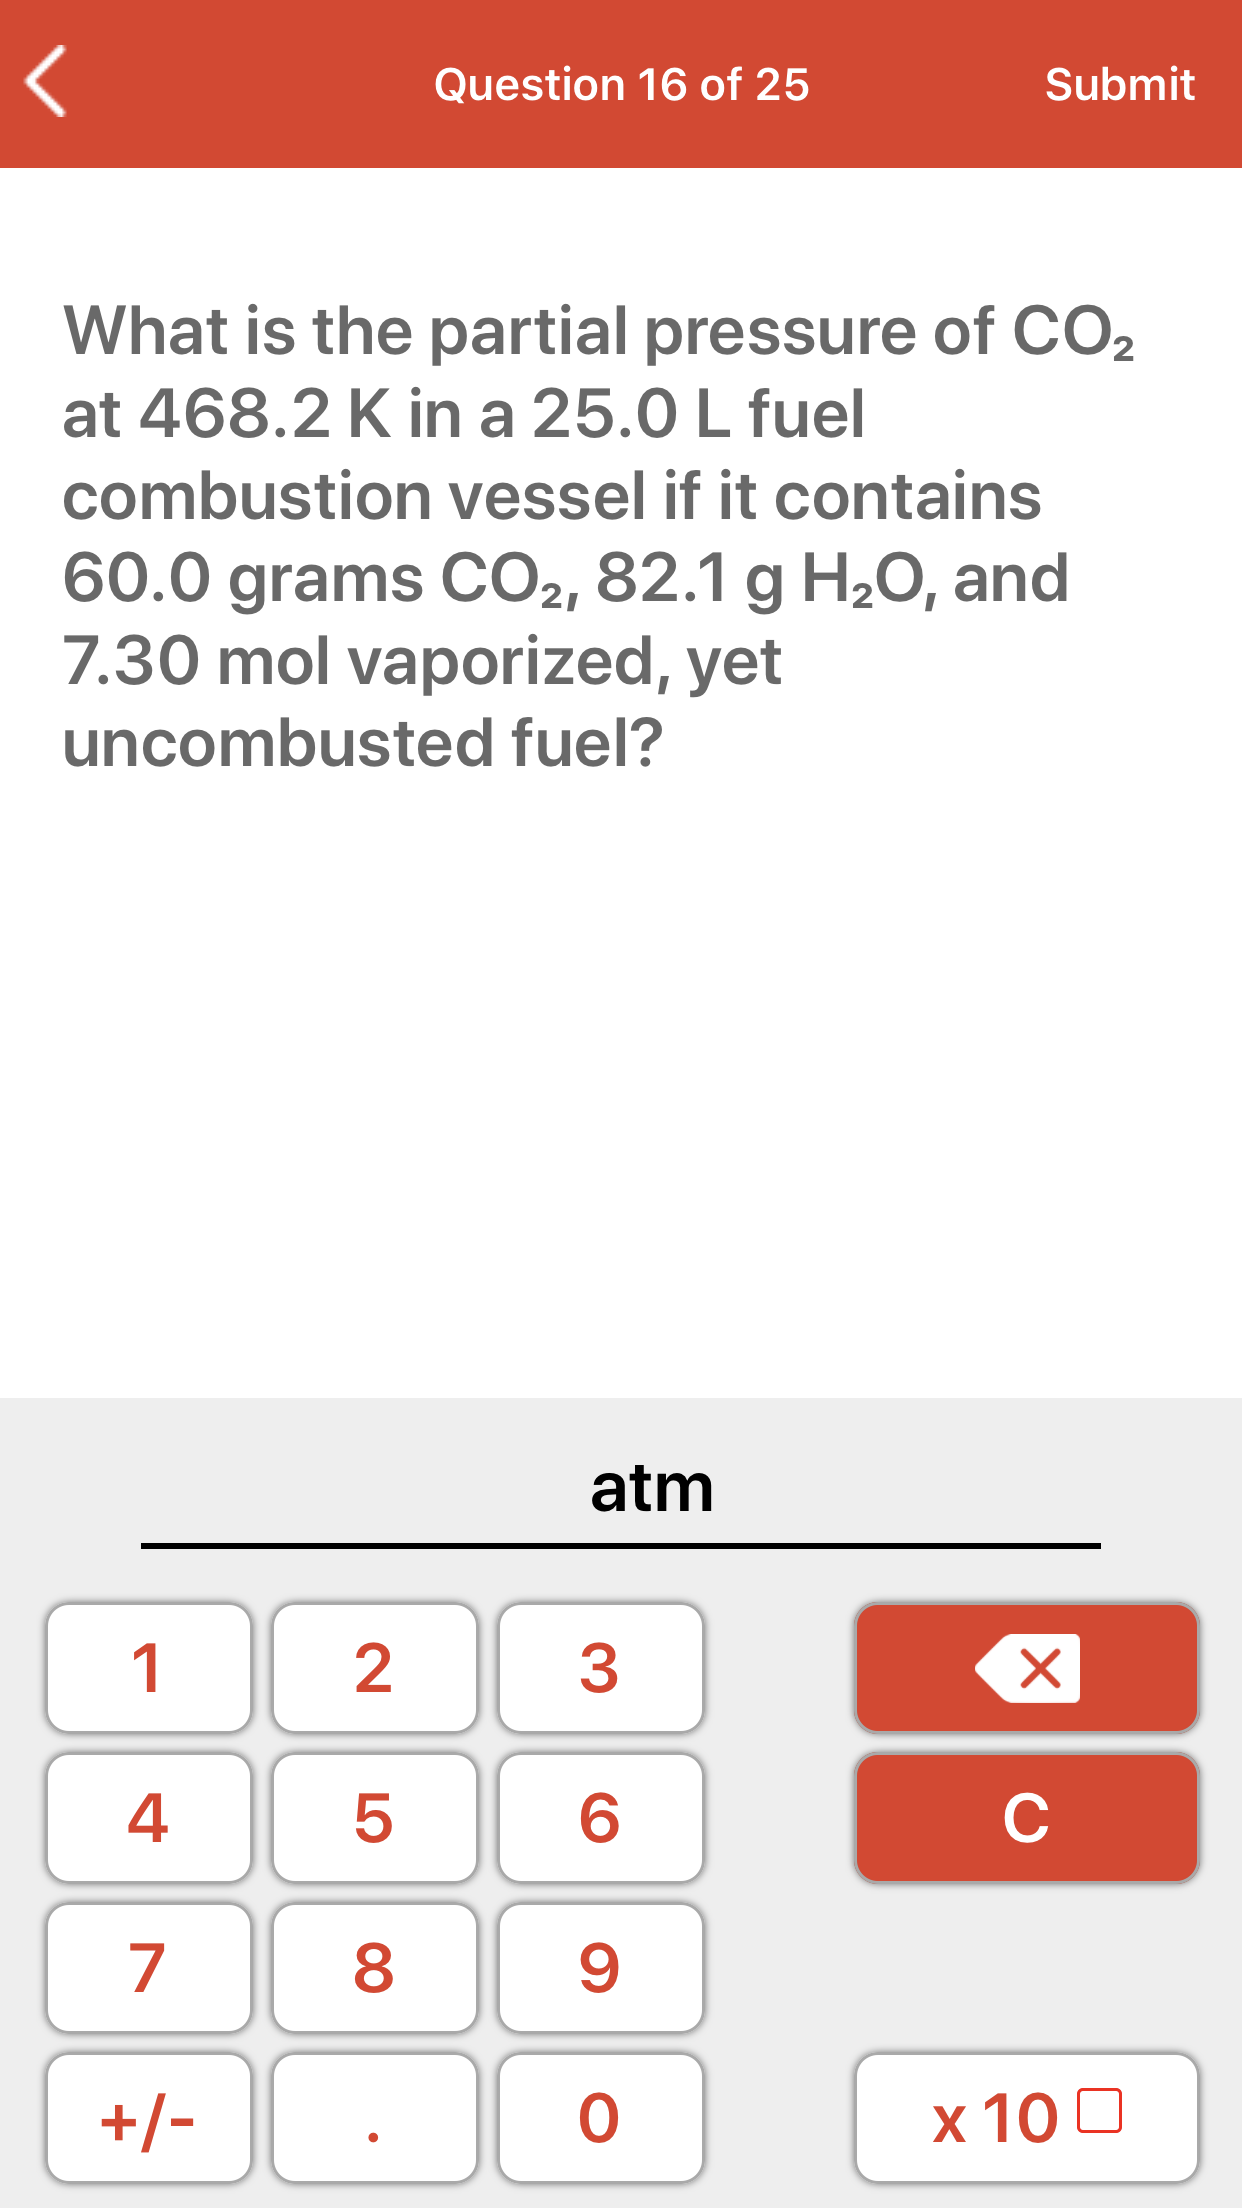 What is the partial pressure of CO2
at 468.2 K in a 25.0 L fuel
combustion vessel if it contains
60.0 grams CO2, 82.1 g H20, and
7.30 mol vaporized, yet
uncombusted fuel?
